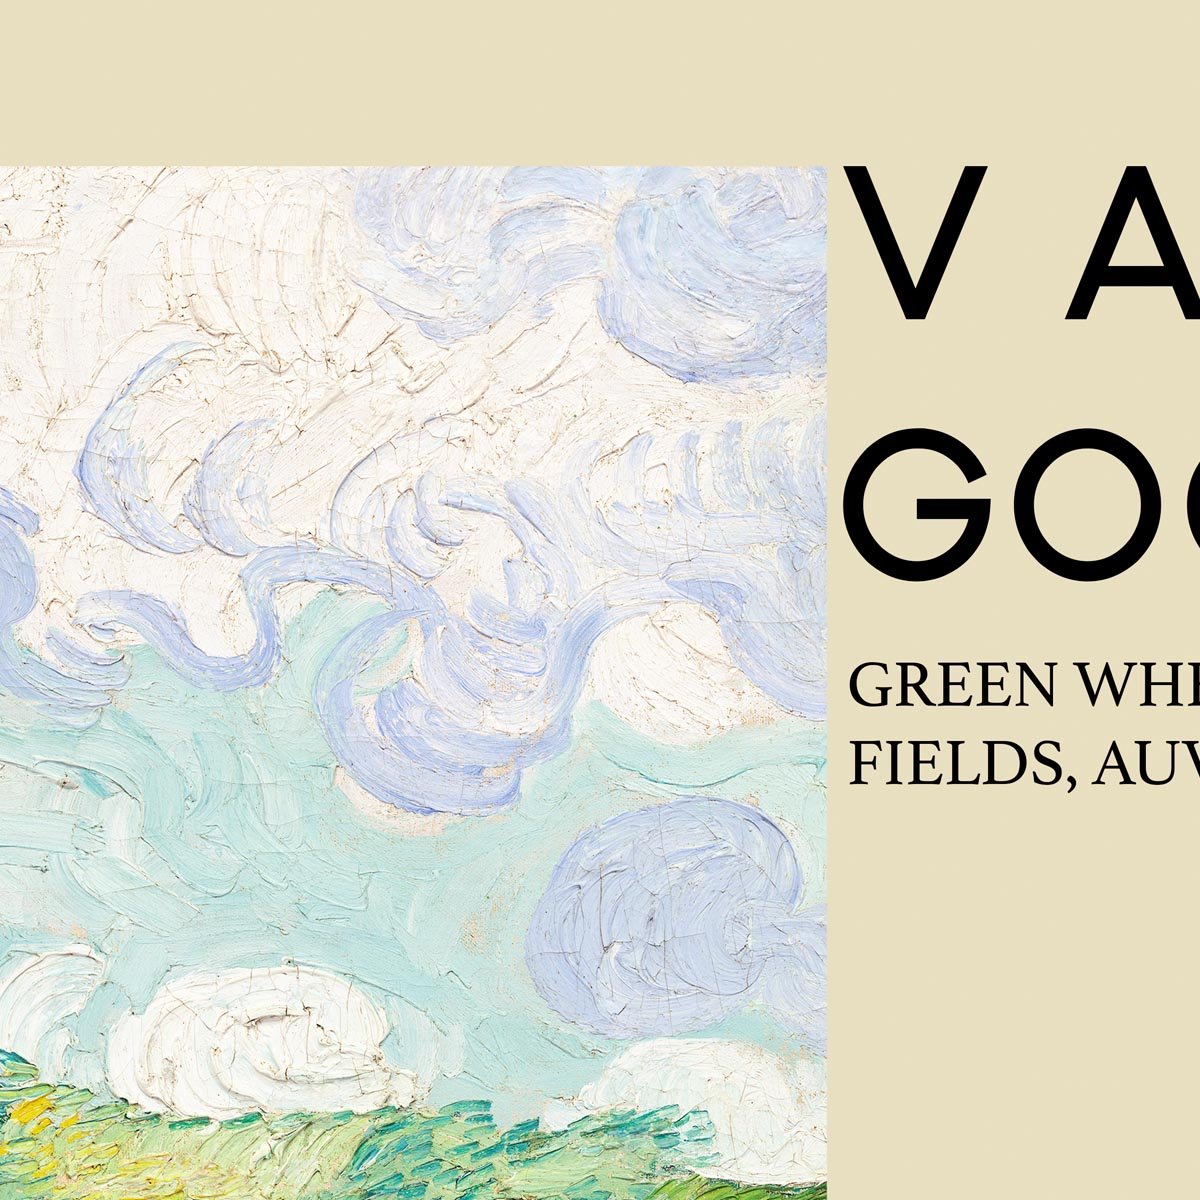 Green Wheat Fields Auvers Art Poster by Van Gogh